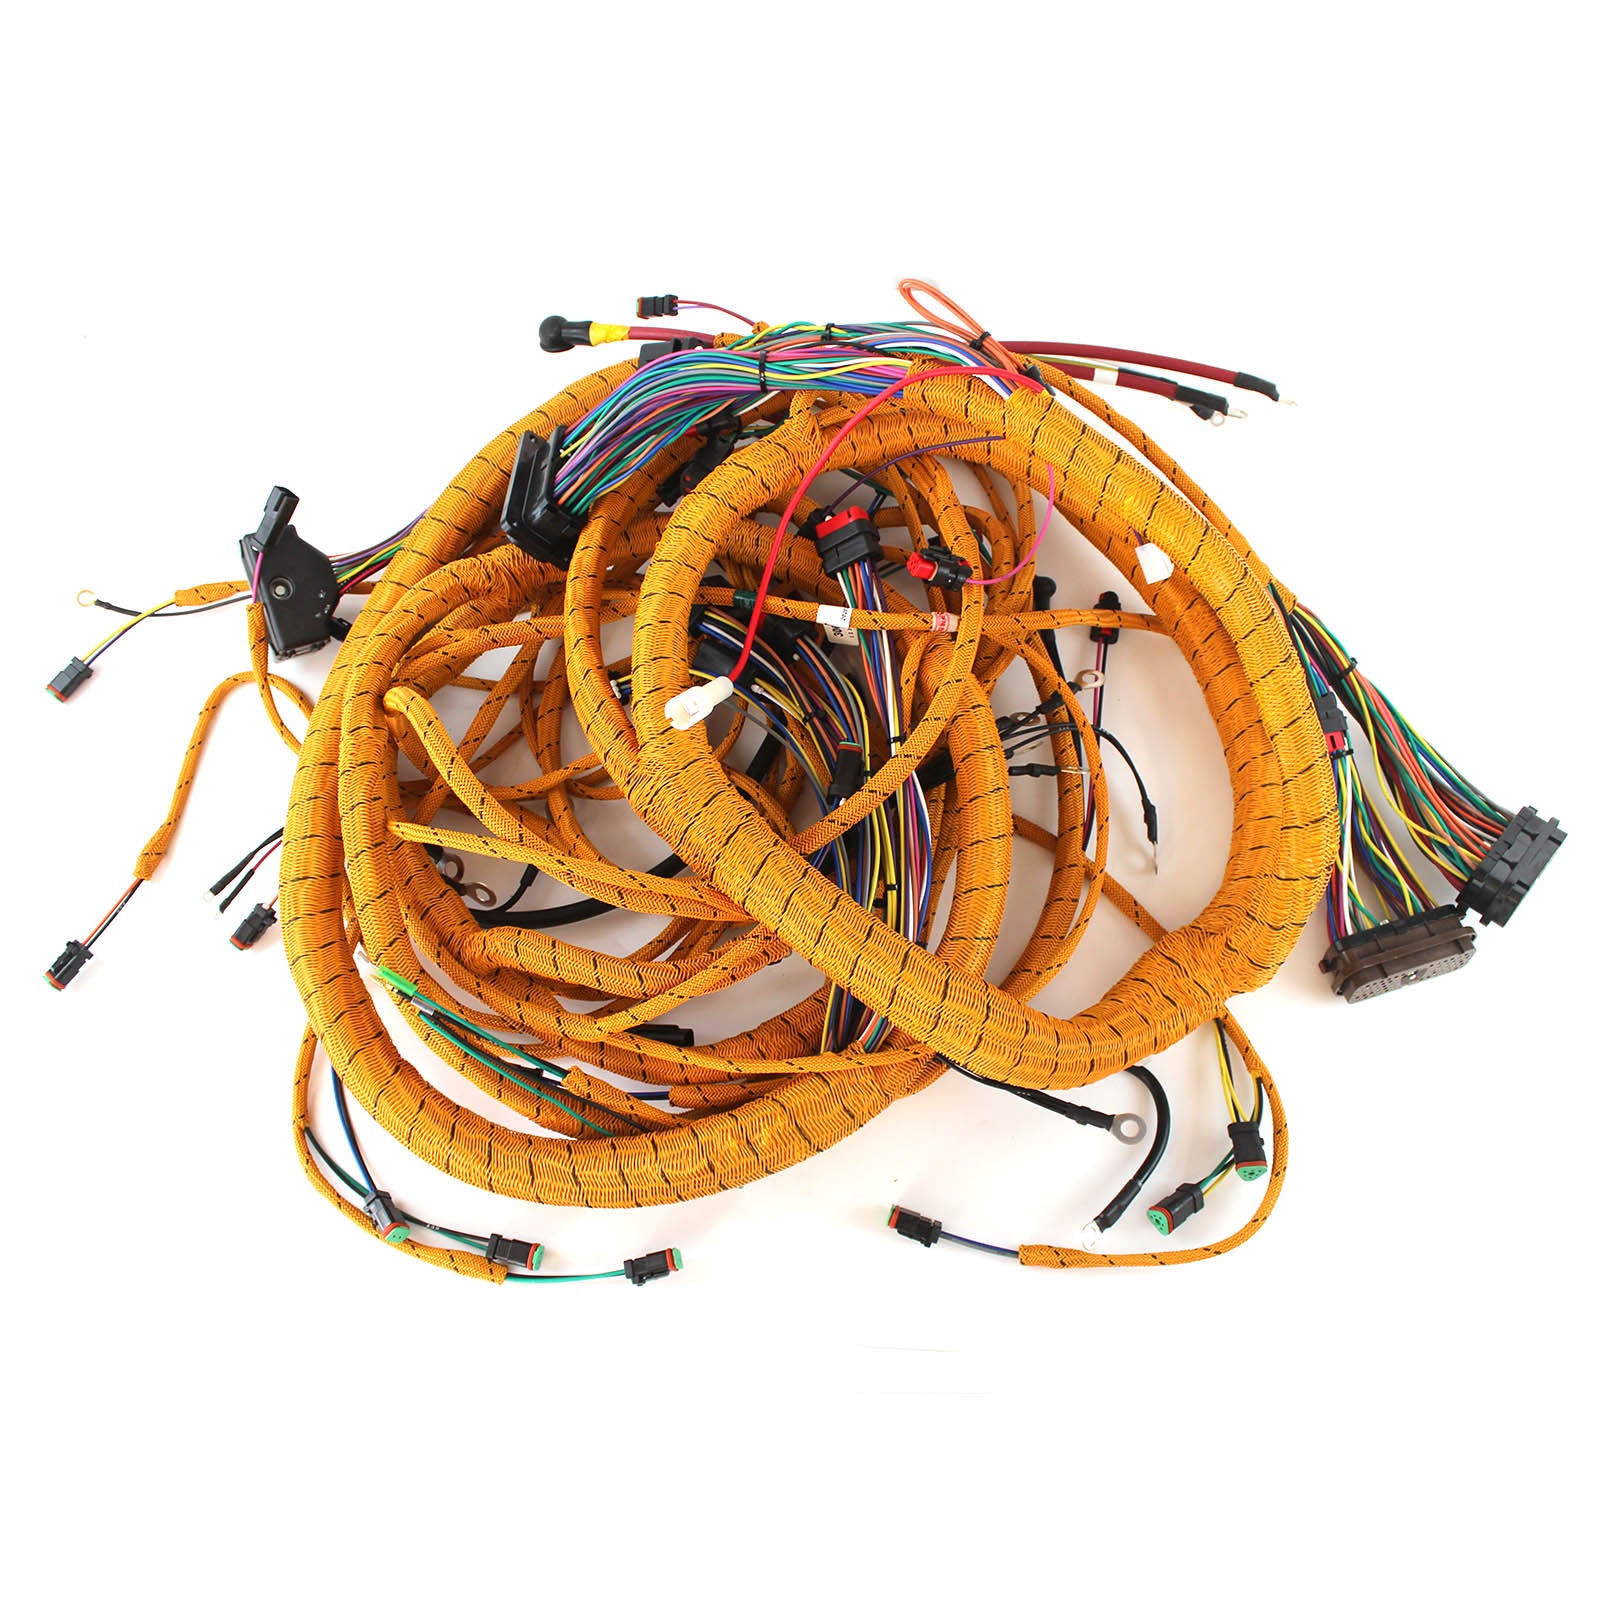 291-7589 2917589 Wiring Harness for CAT 3066 C6.4 320D